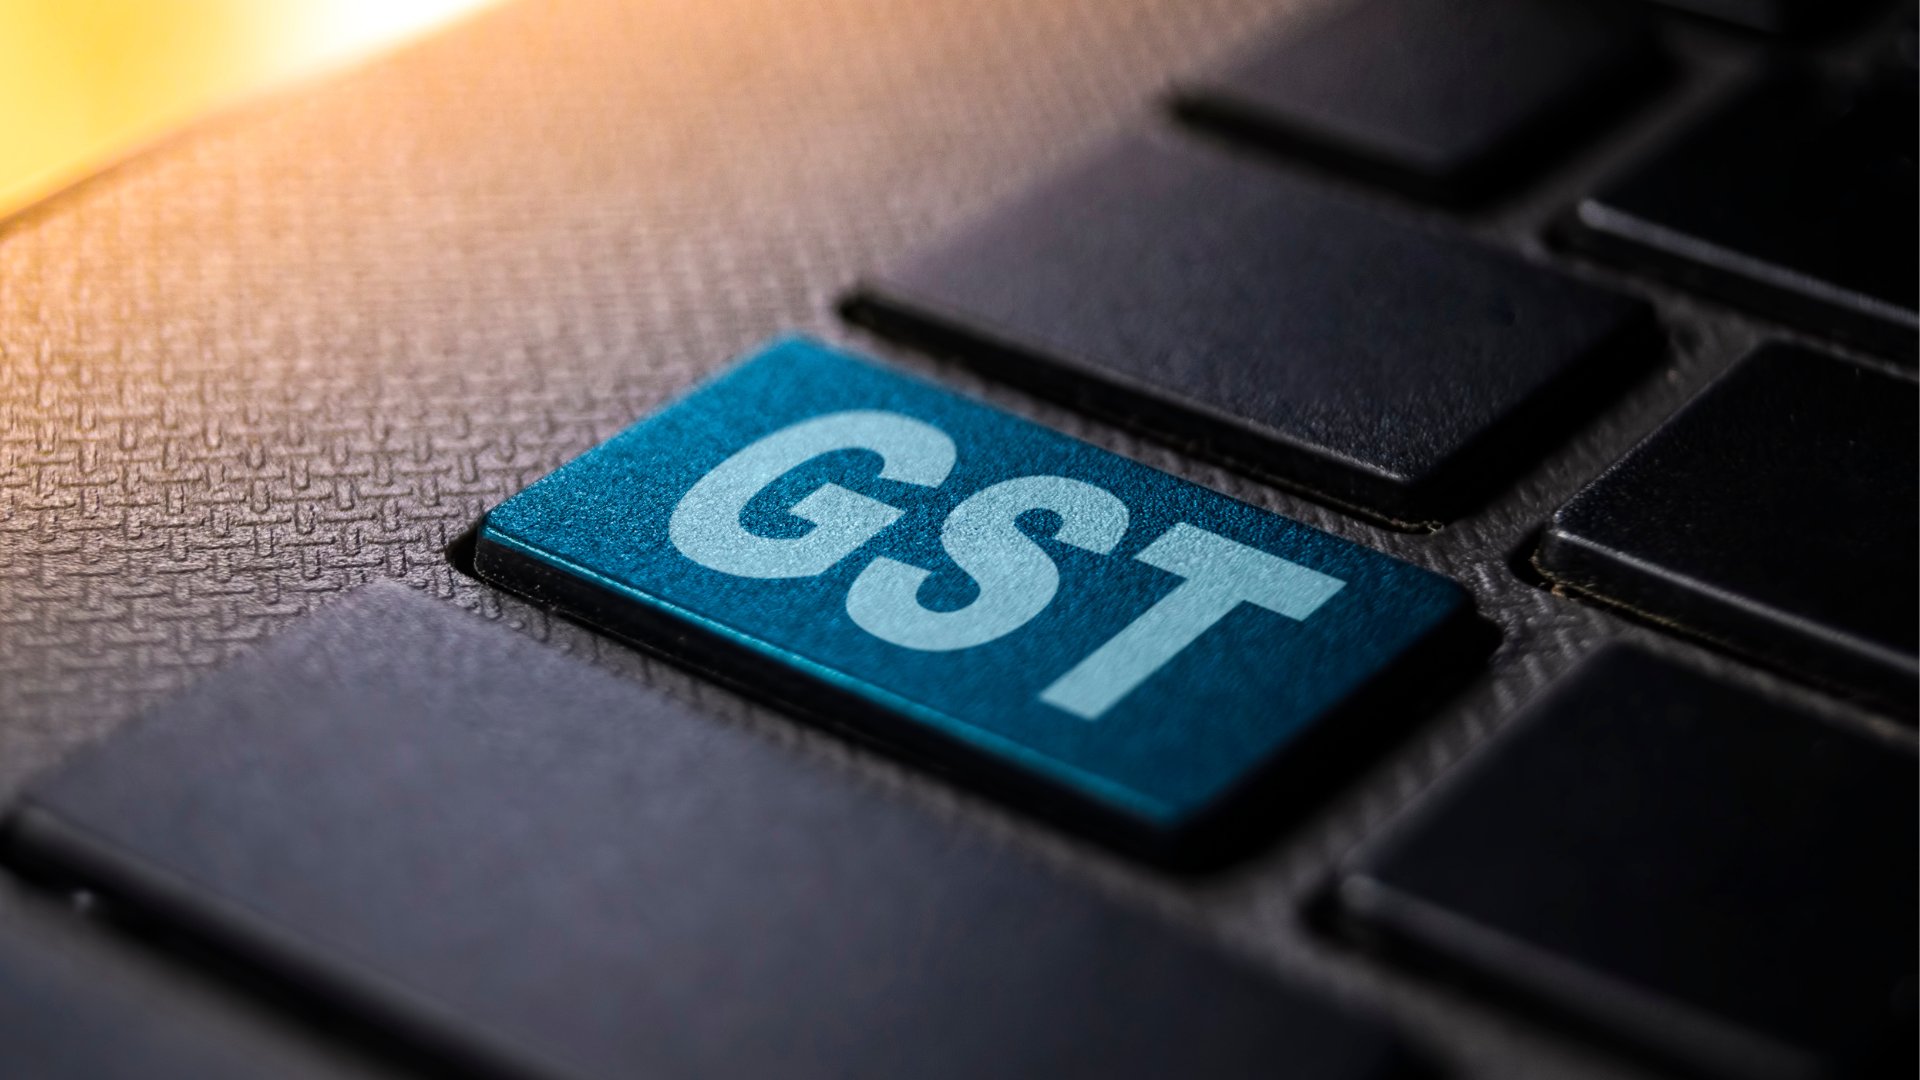 Are you prepared for the upcoming GST rate change in Singapore?